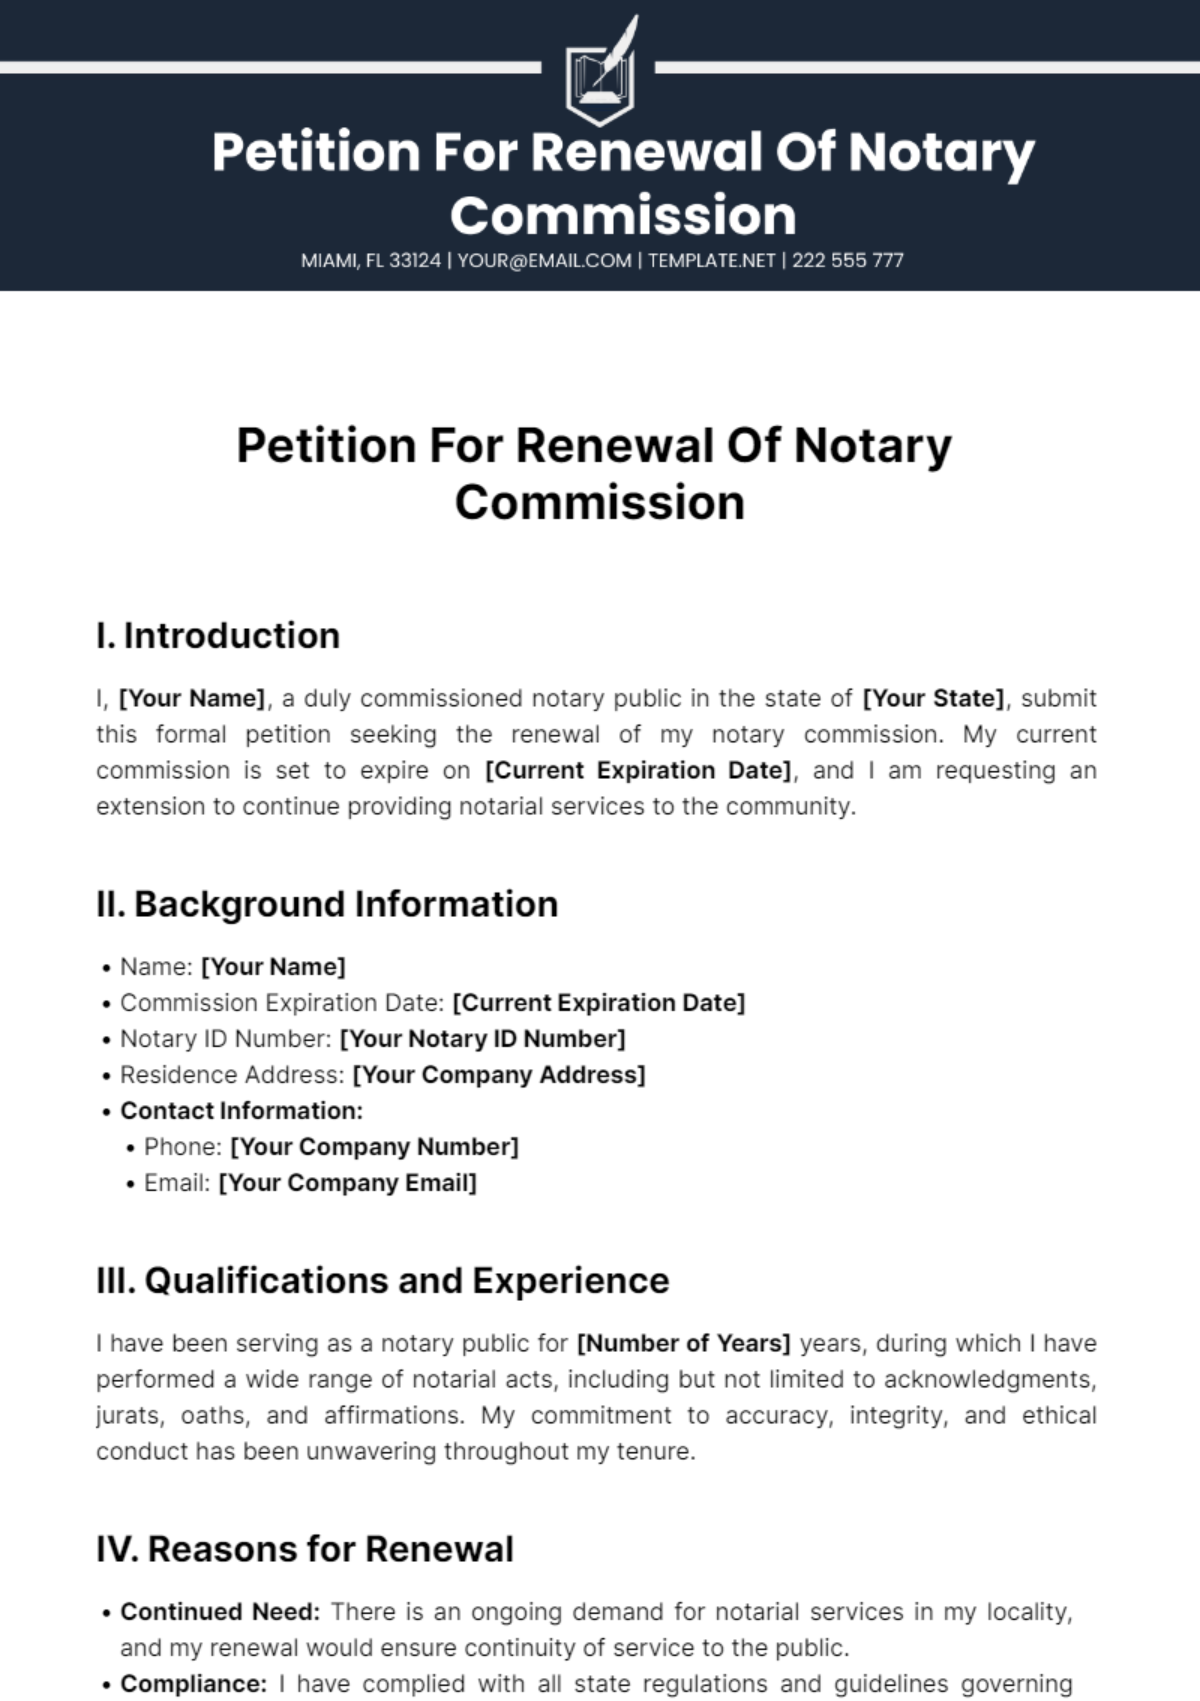 Petition For Renewal Of Notary Commission Template